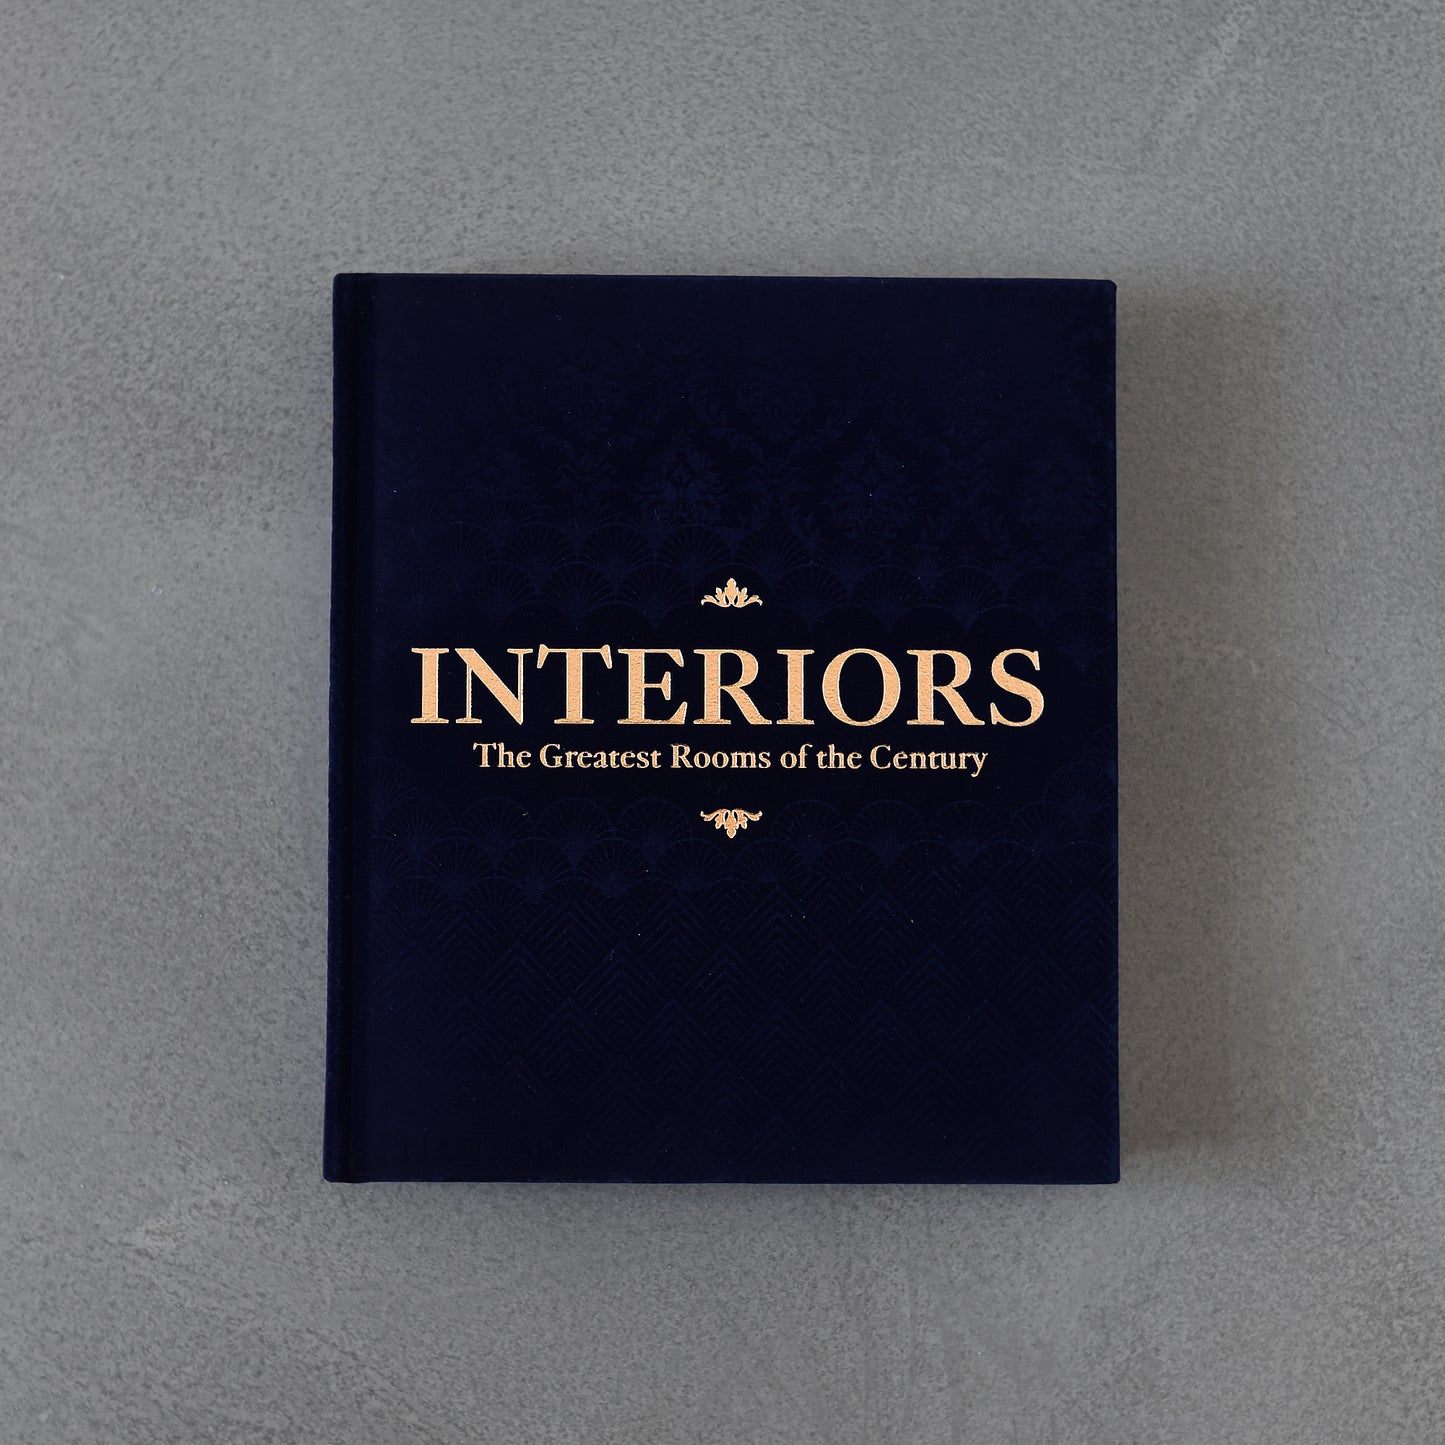 INTERIORS: The Greatest Rooms of the Century (Midnight Blue Edition)